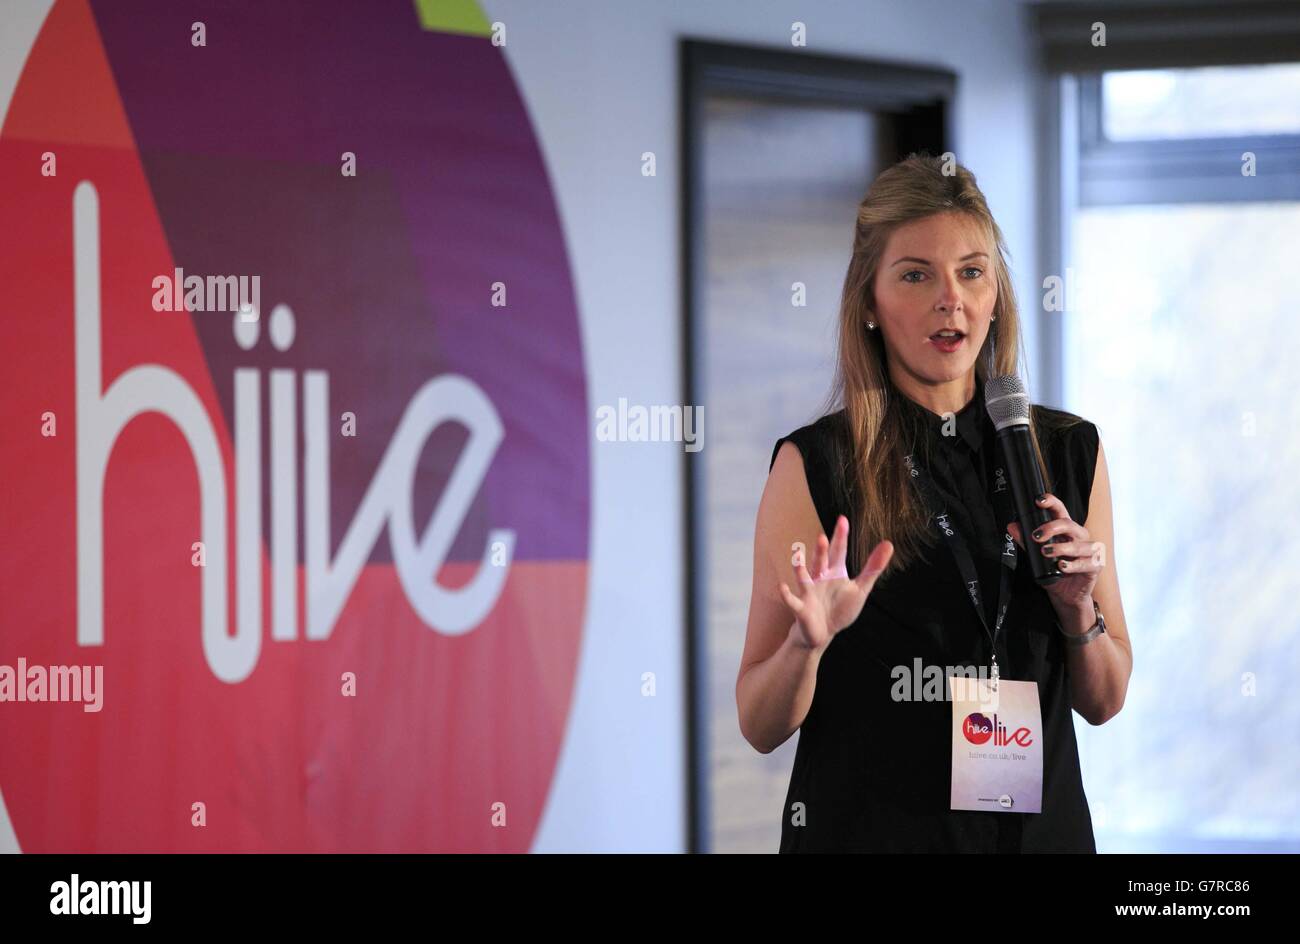 Charlotte Morton, Creative Agencies Partnerships at Google UK, at the launch of Hiive.co.uk - a professional networking, collaboration and job-finding tool for UK creatives, at The Trampery in east London. Stock Photo